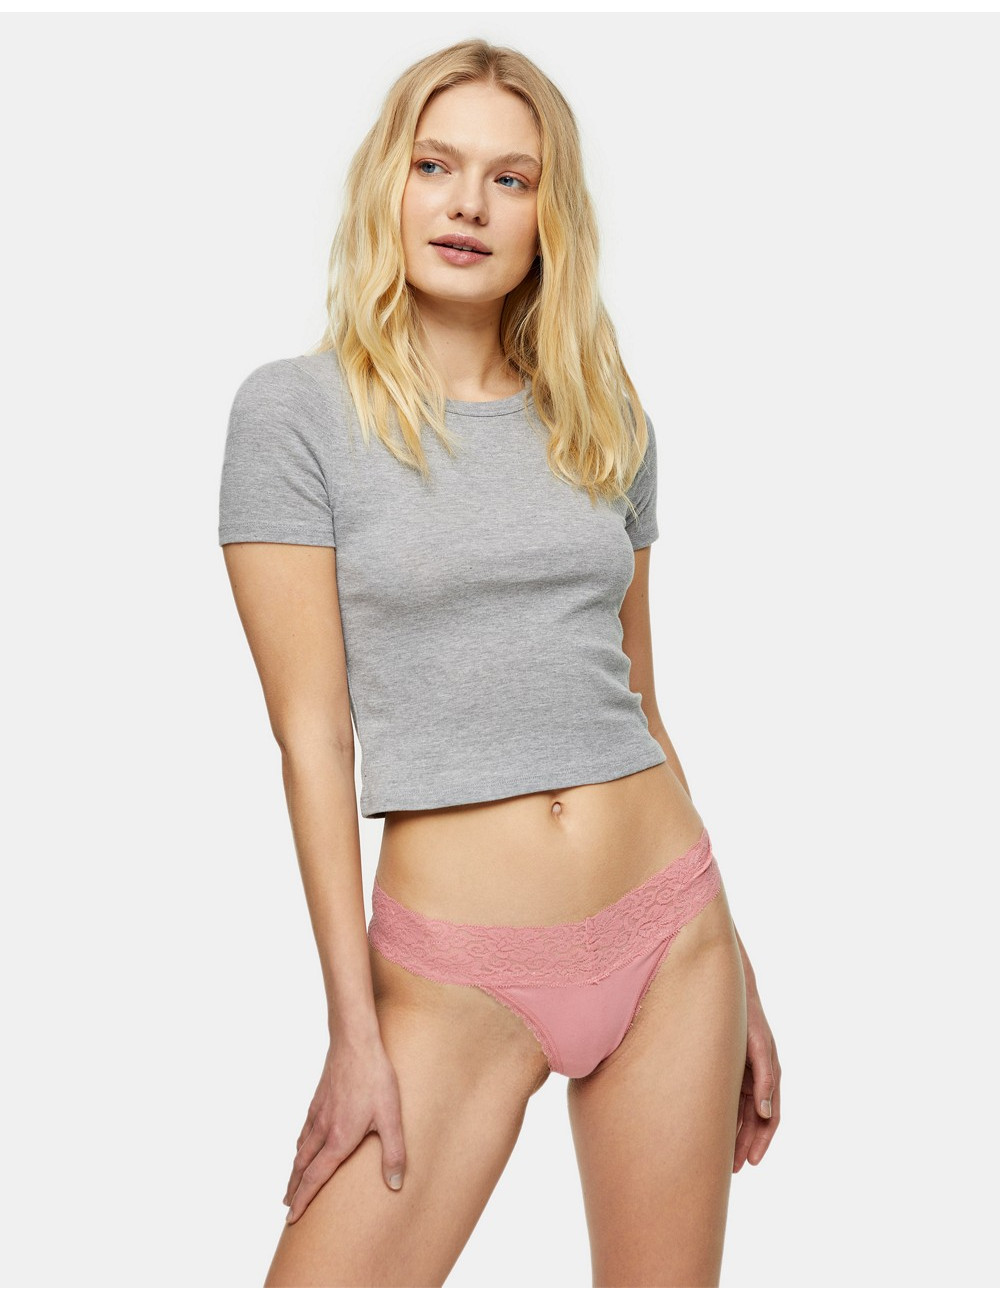 Topshop waistband thong in...